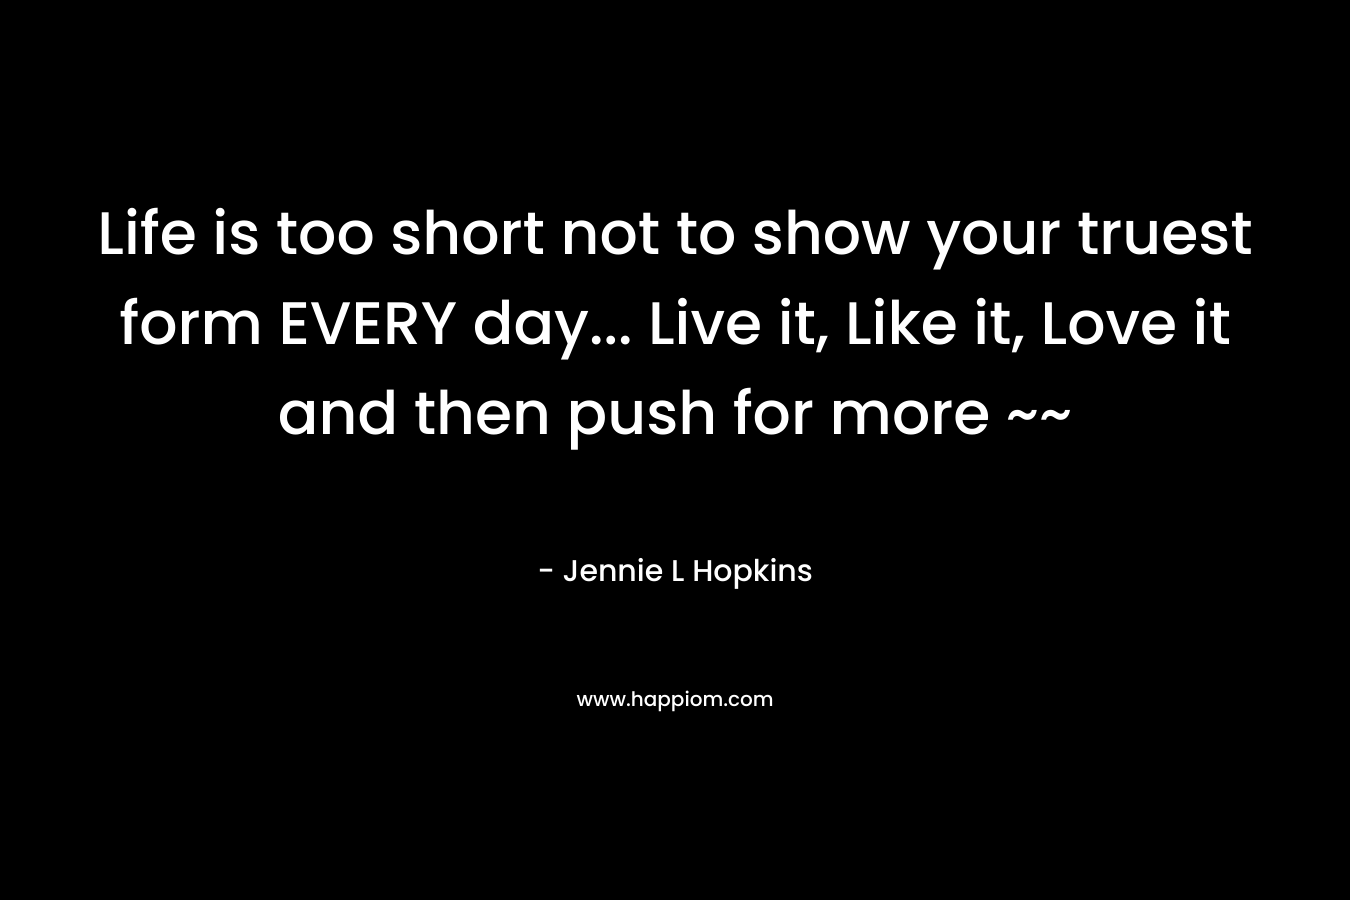 Life is too short not to show your truest form EVERY day... Live it, Like it, Love it and then push for more ~~